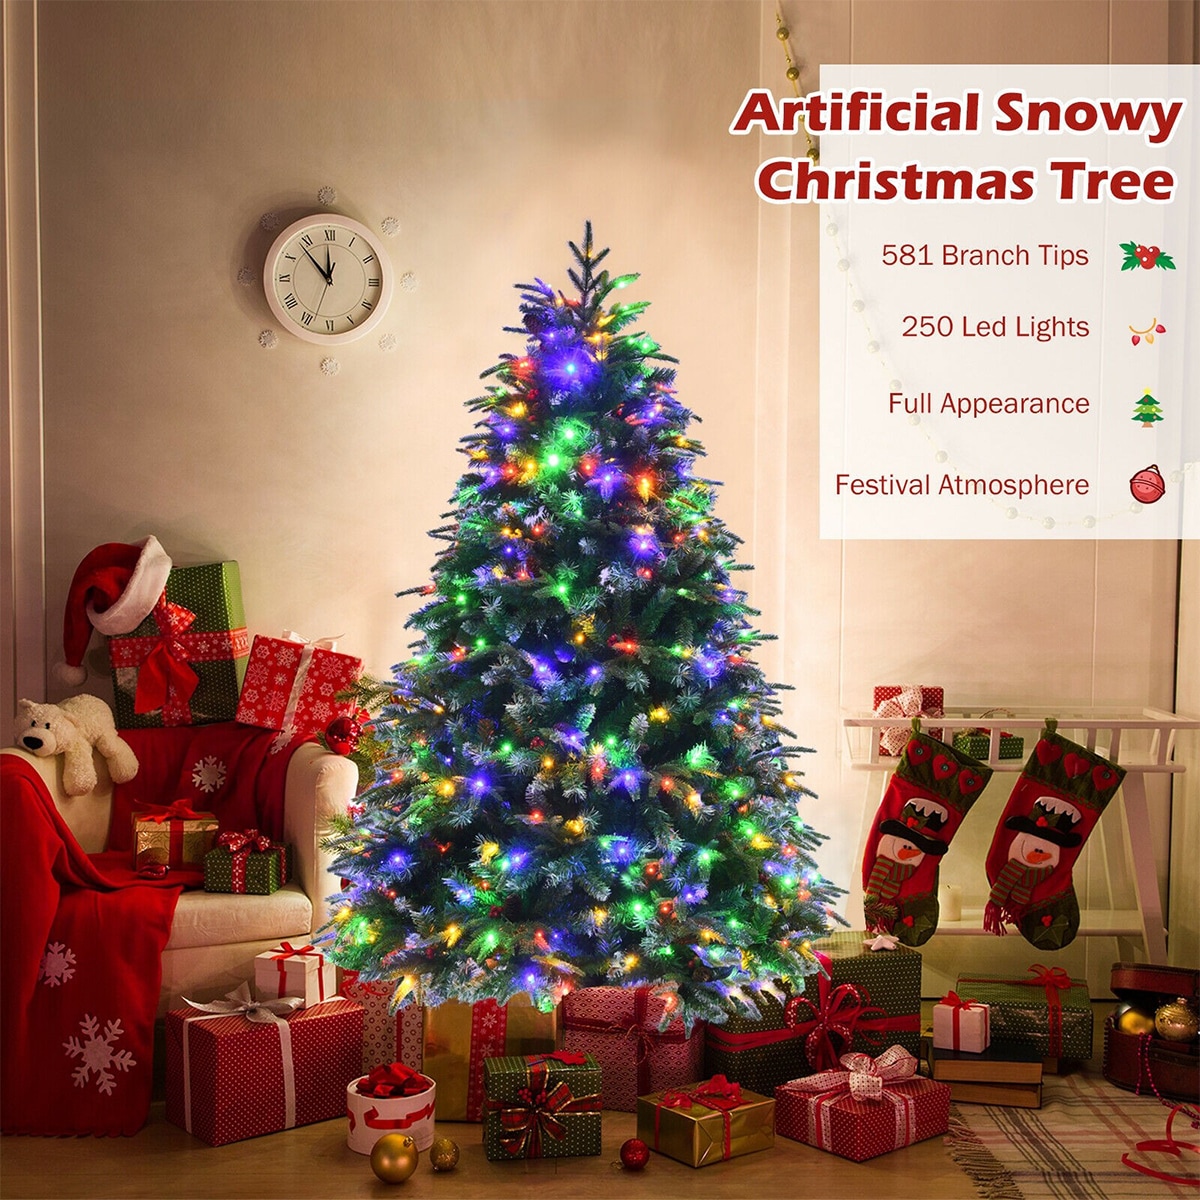 Costway 8ft Pre-Lit Hinged Christmas Tree Snow Flocked w/ 9 Modes Remote Control Lights